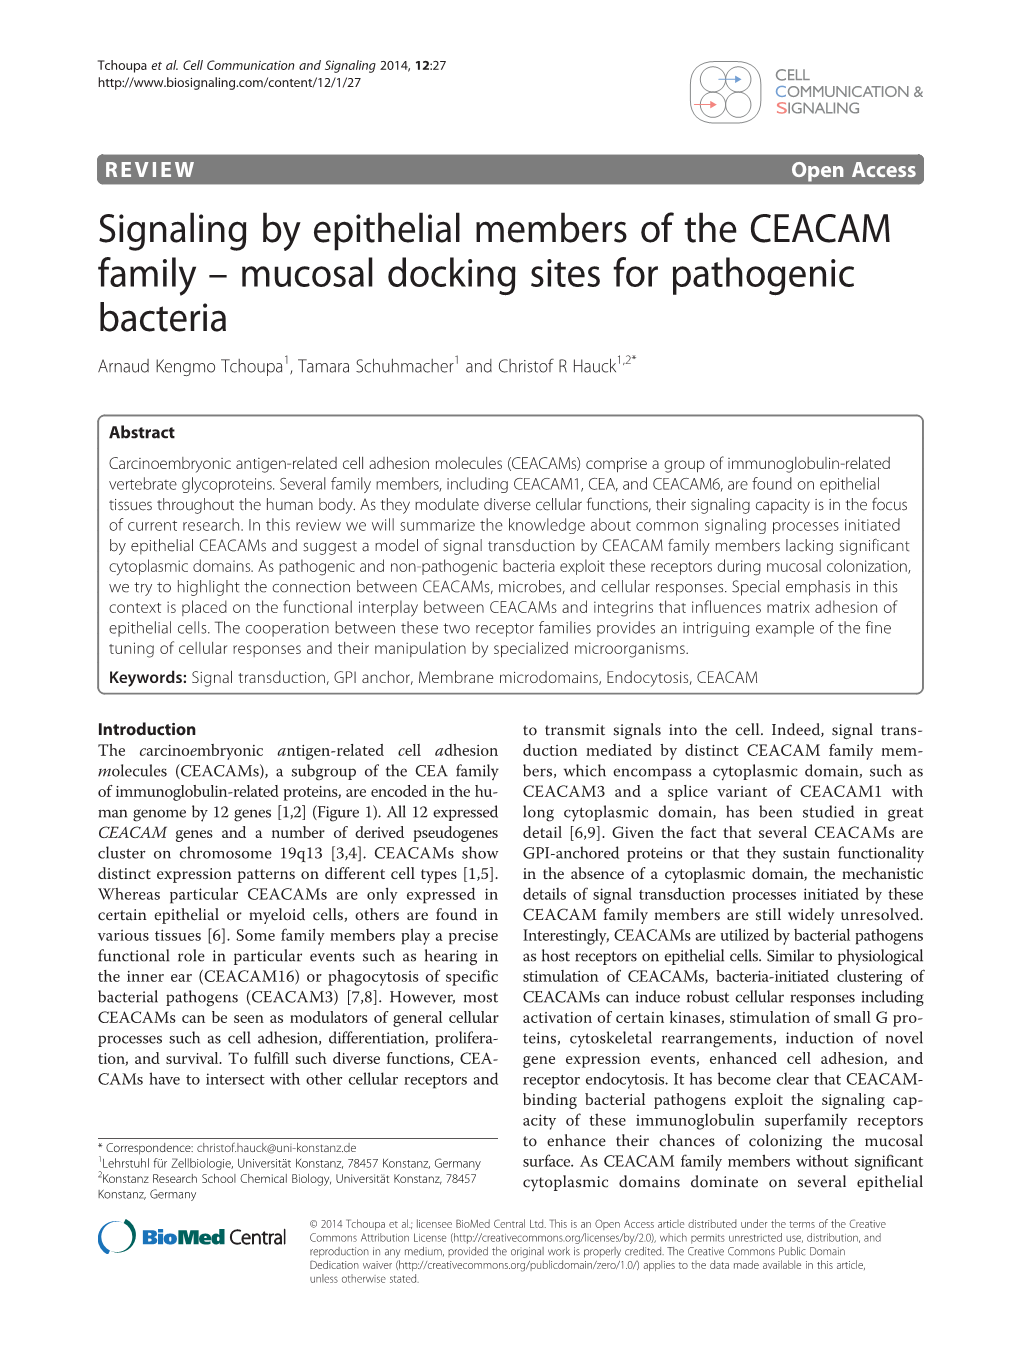 Signaling by Epithelial Members of the CEACAM Family